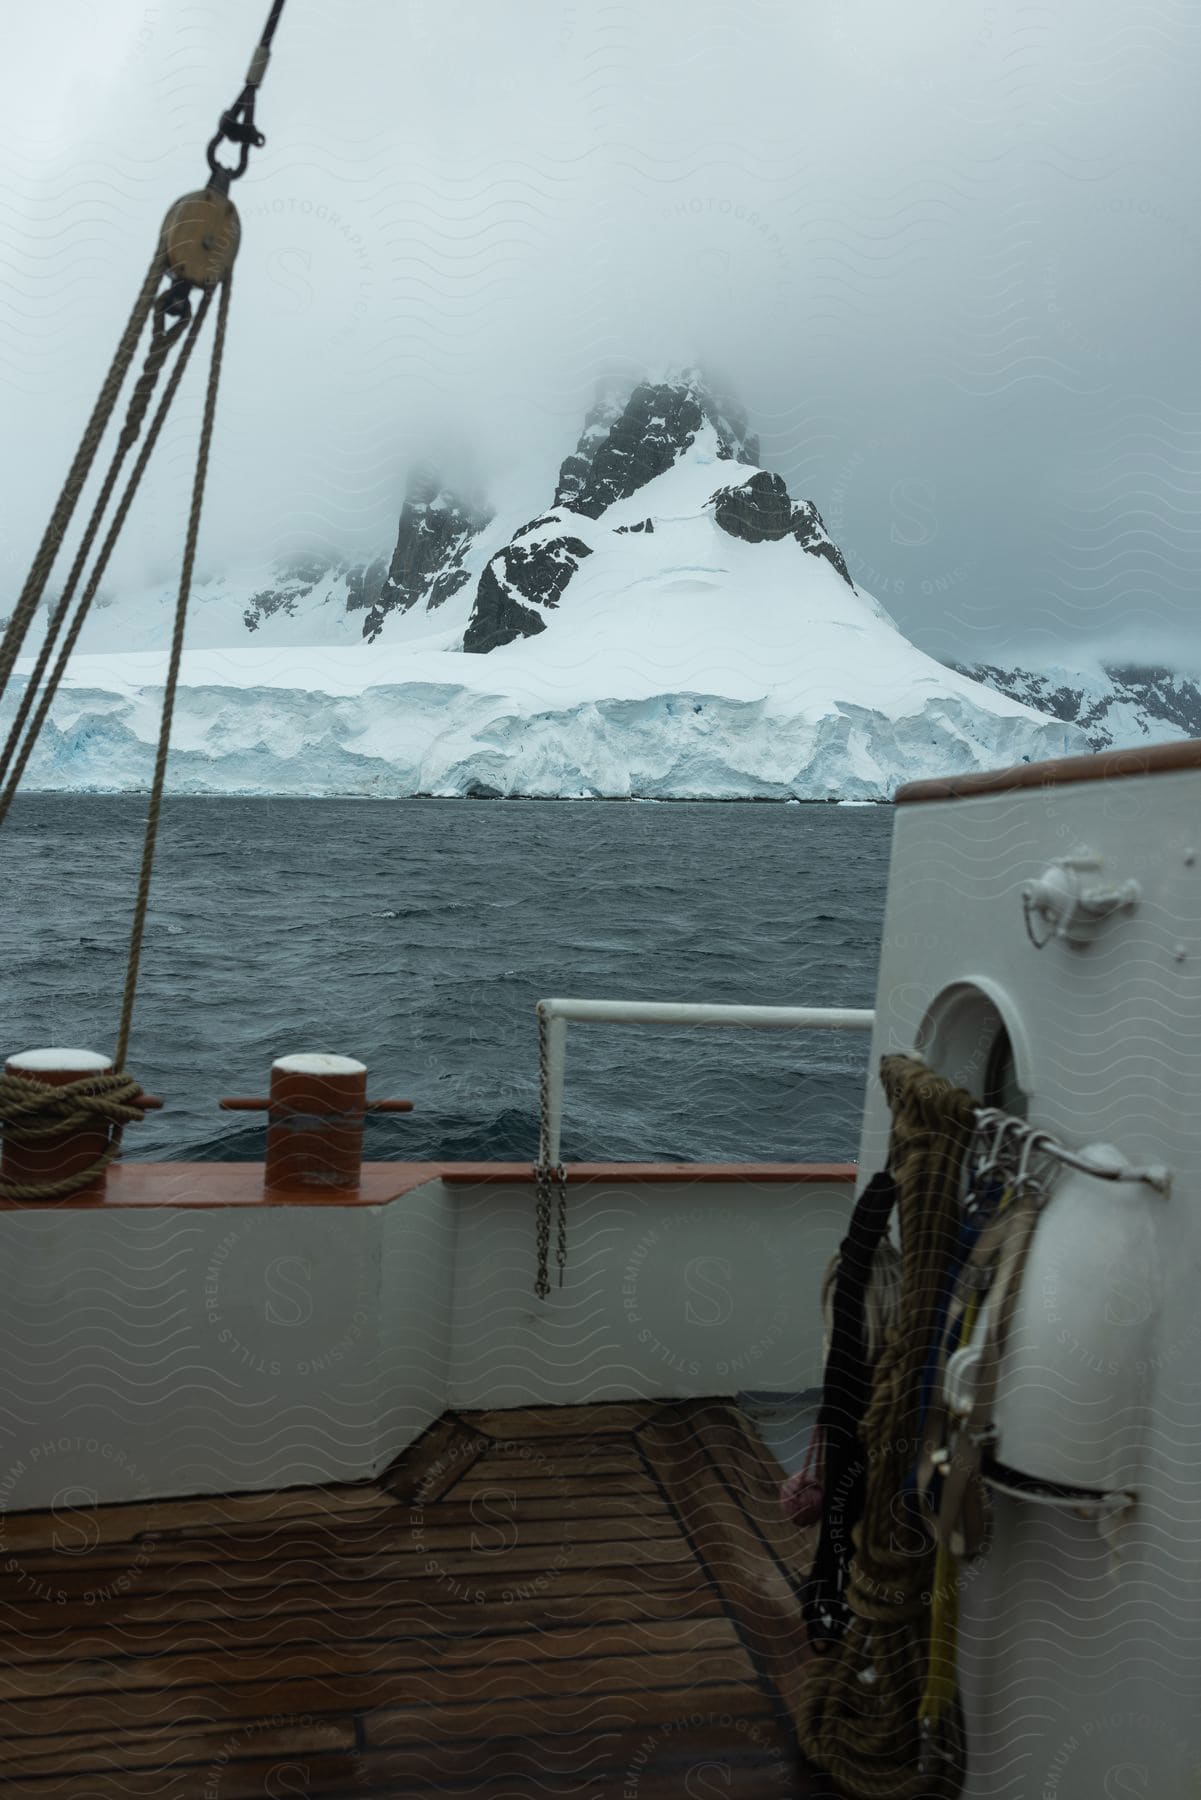 A snowy bank rises to a mountain seen from the deck of a boat